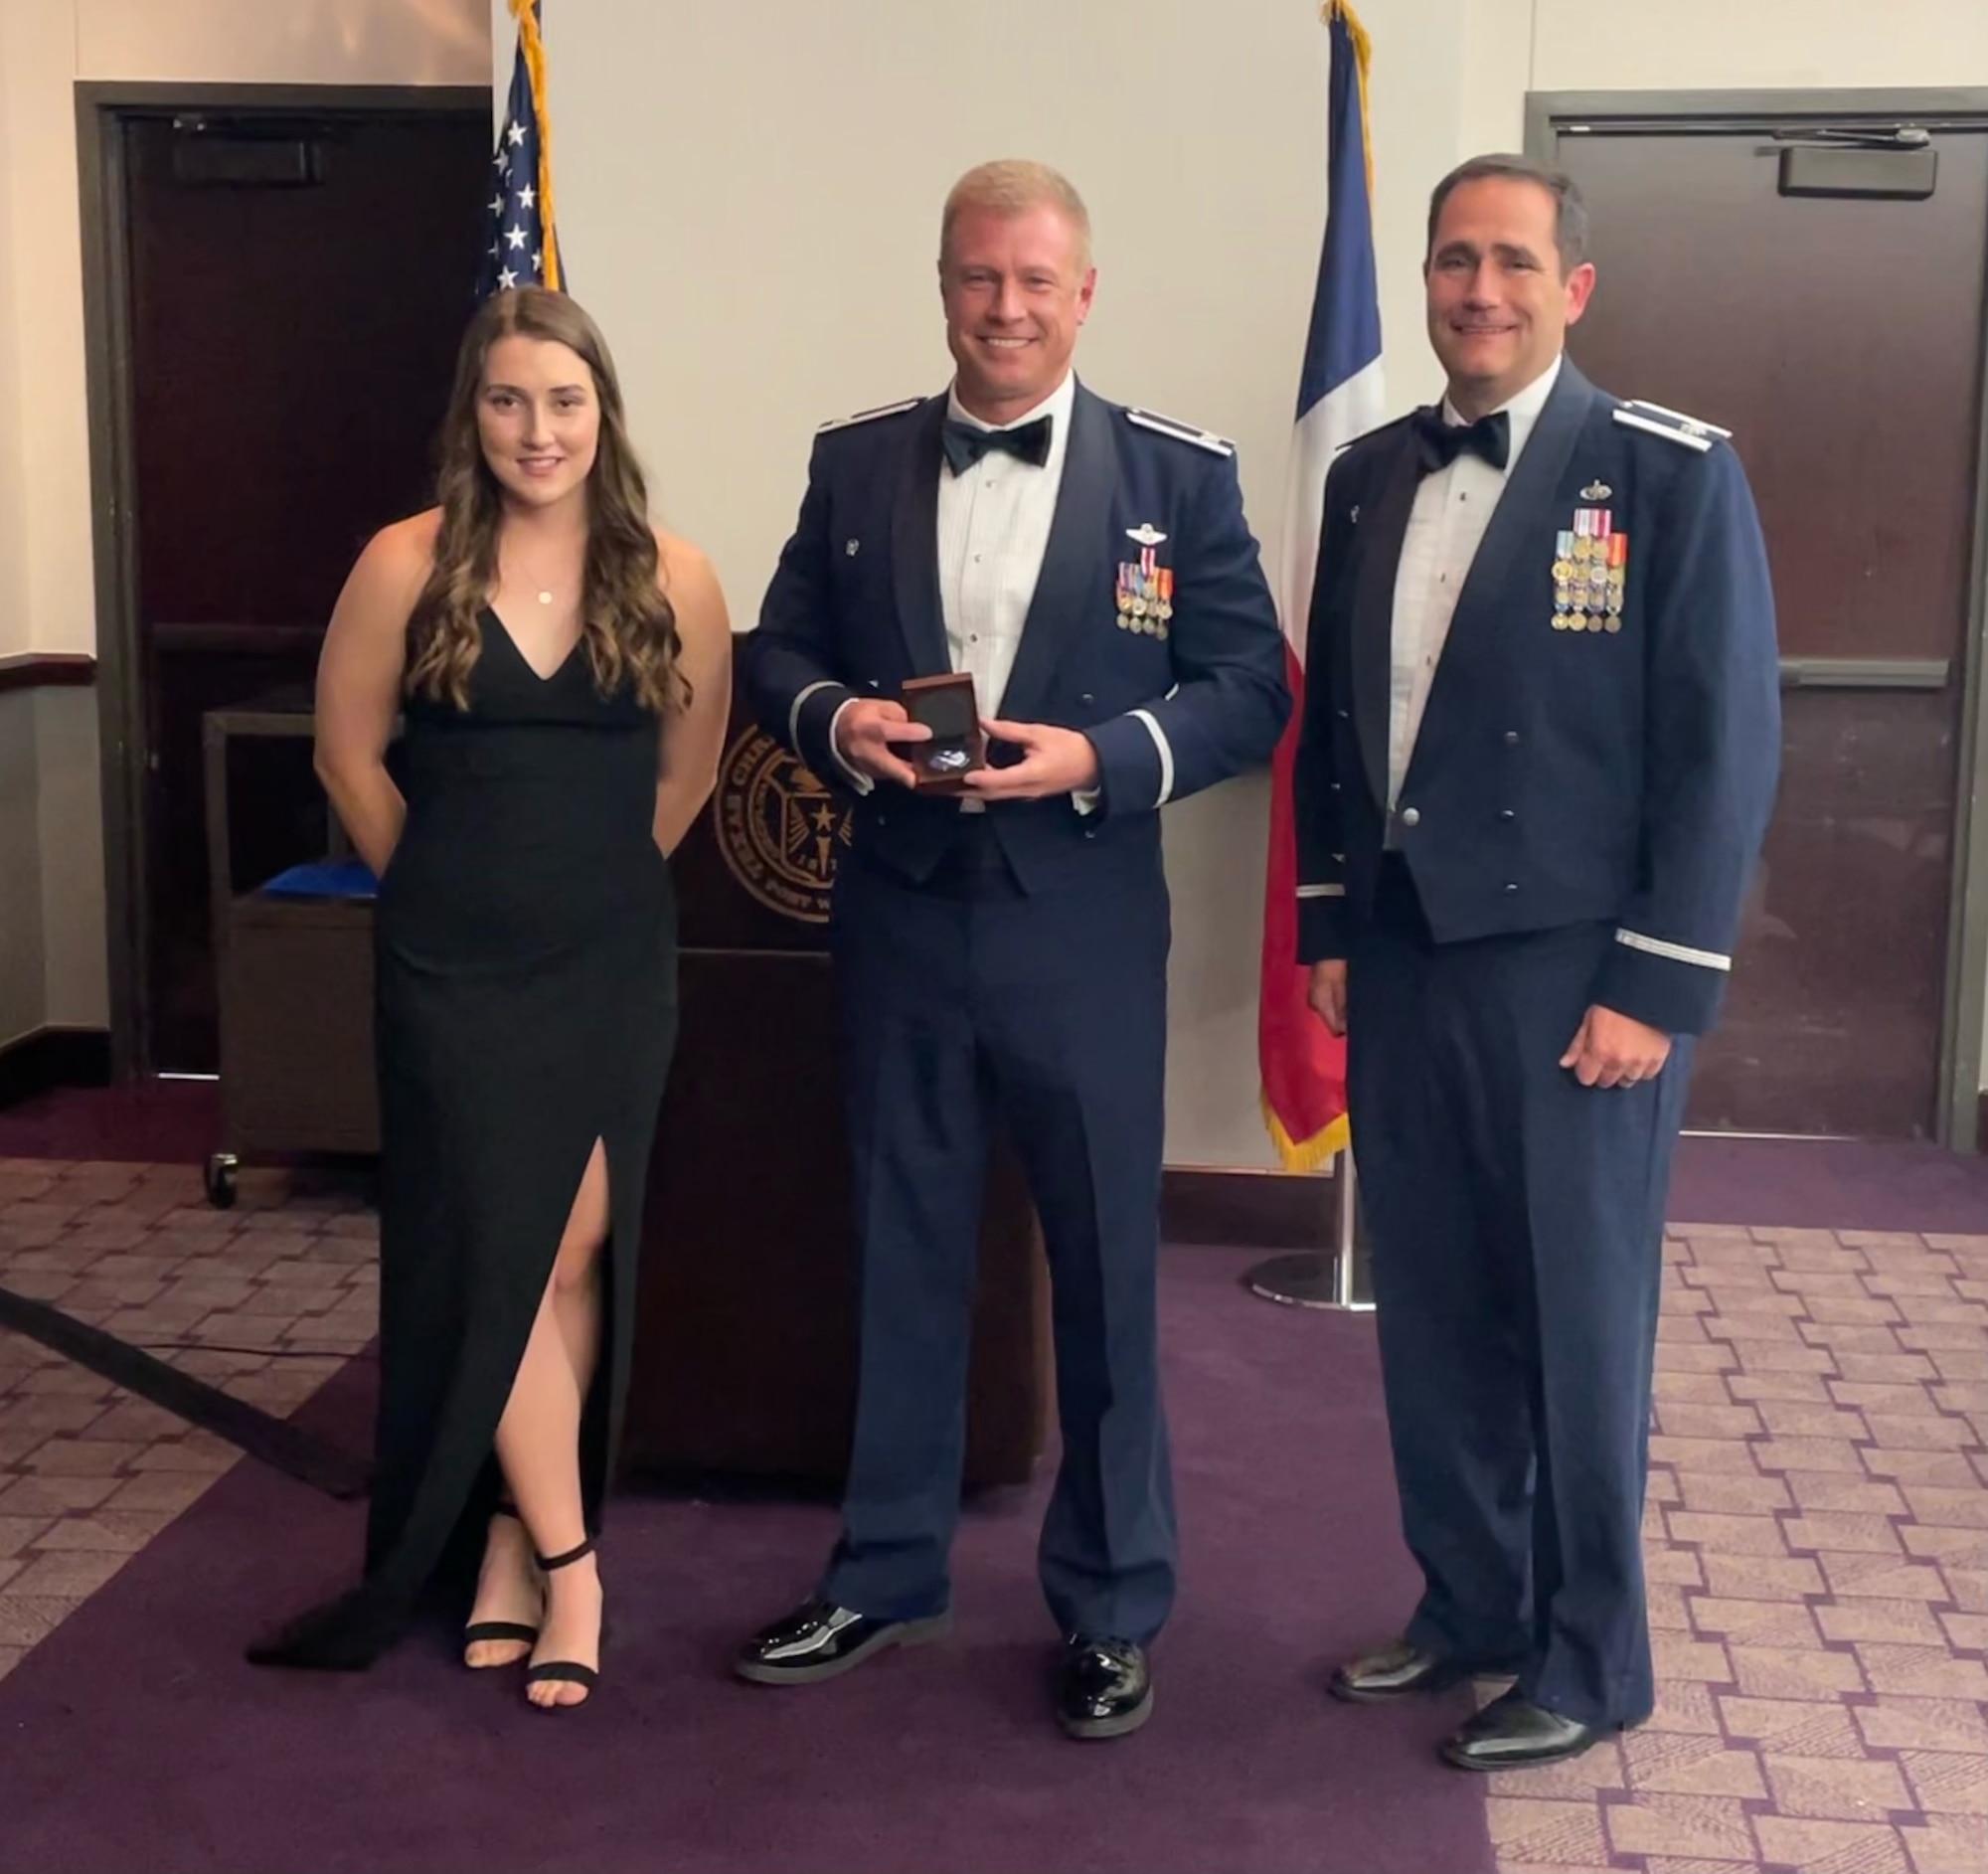 (left) Air Force Reserve Officer Training Corps Detachment 845 Cadet Rebekah Premenko, the event's narrator, and (right) Lt. Col. James Fagan, AFROTC Det. 845 commander, present 301st Fighter Wing Commander Col. Allen Duckworth, the event's keynote speaker with a detachment coin at the Texas Christian University AFROTC Det. 845 Spring Dining Out Ceremony, April 23. This military tradition can be traced back prior to WWI and WWII where victories and feats of heroism are celebrated in order to bring about cohesion and camaraderie within a specific unit. (U.S. Air Force photo by Master Sgt. Jeremy Roman)